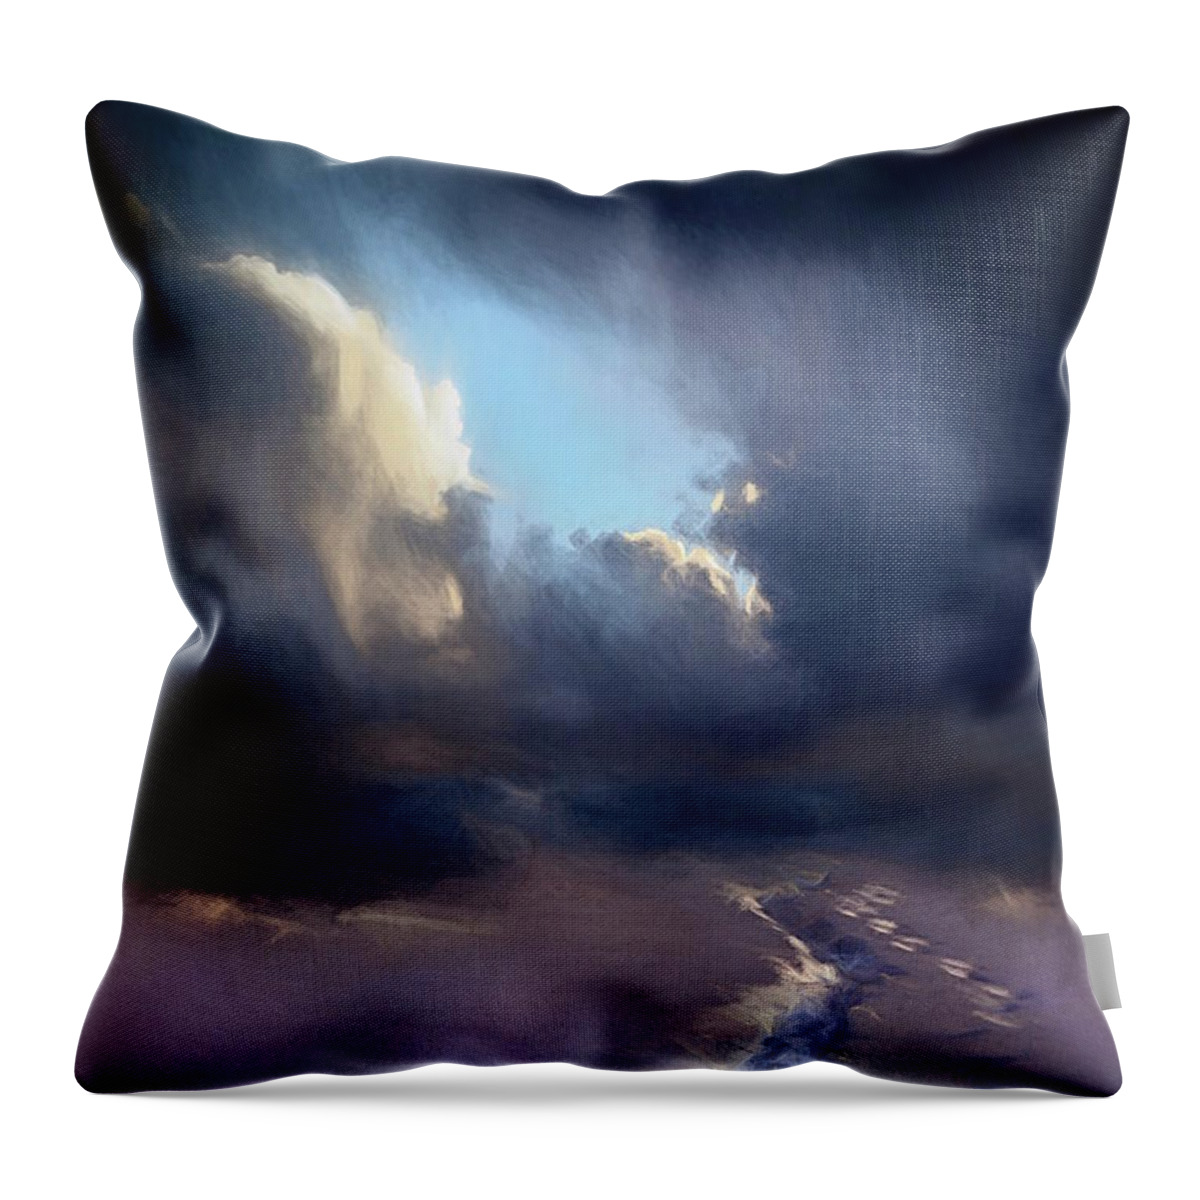 Winter Throw Pillow featuring the digital art Winter Heights - Series 5 by Don DePaola